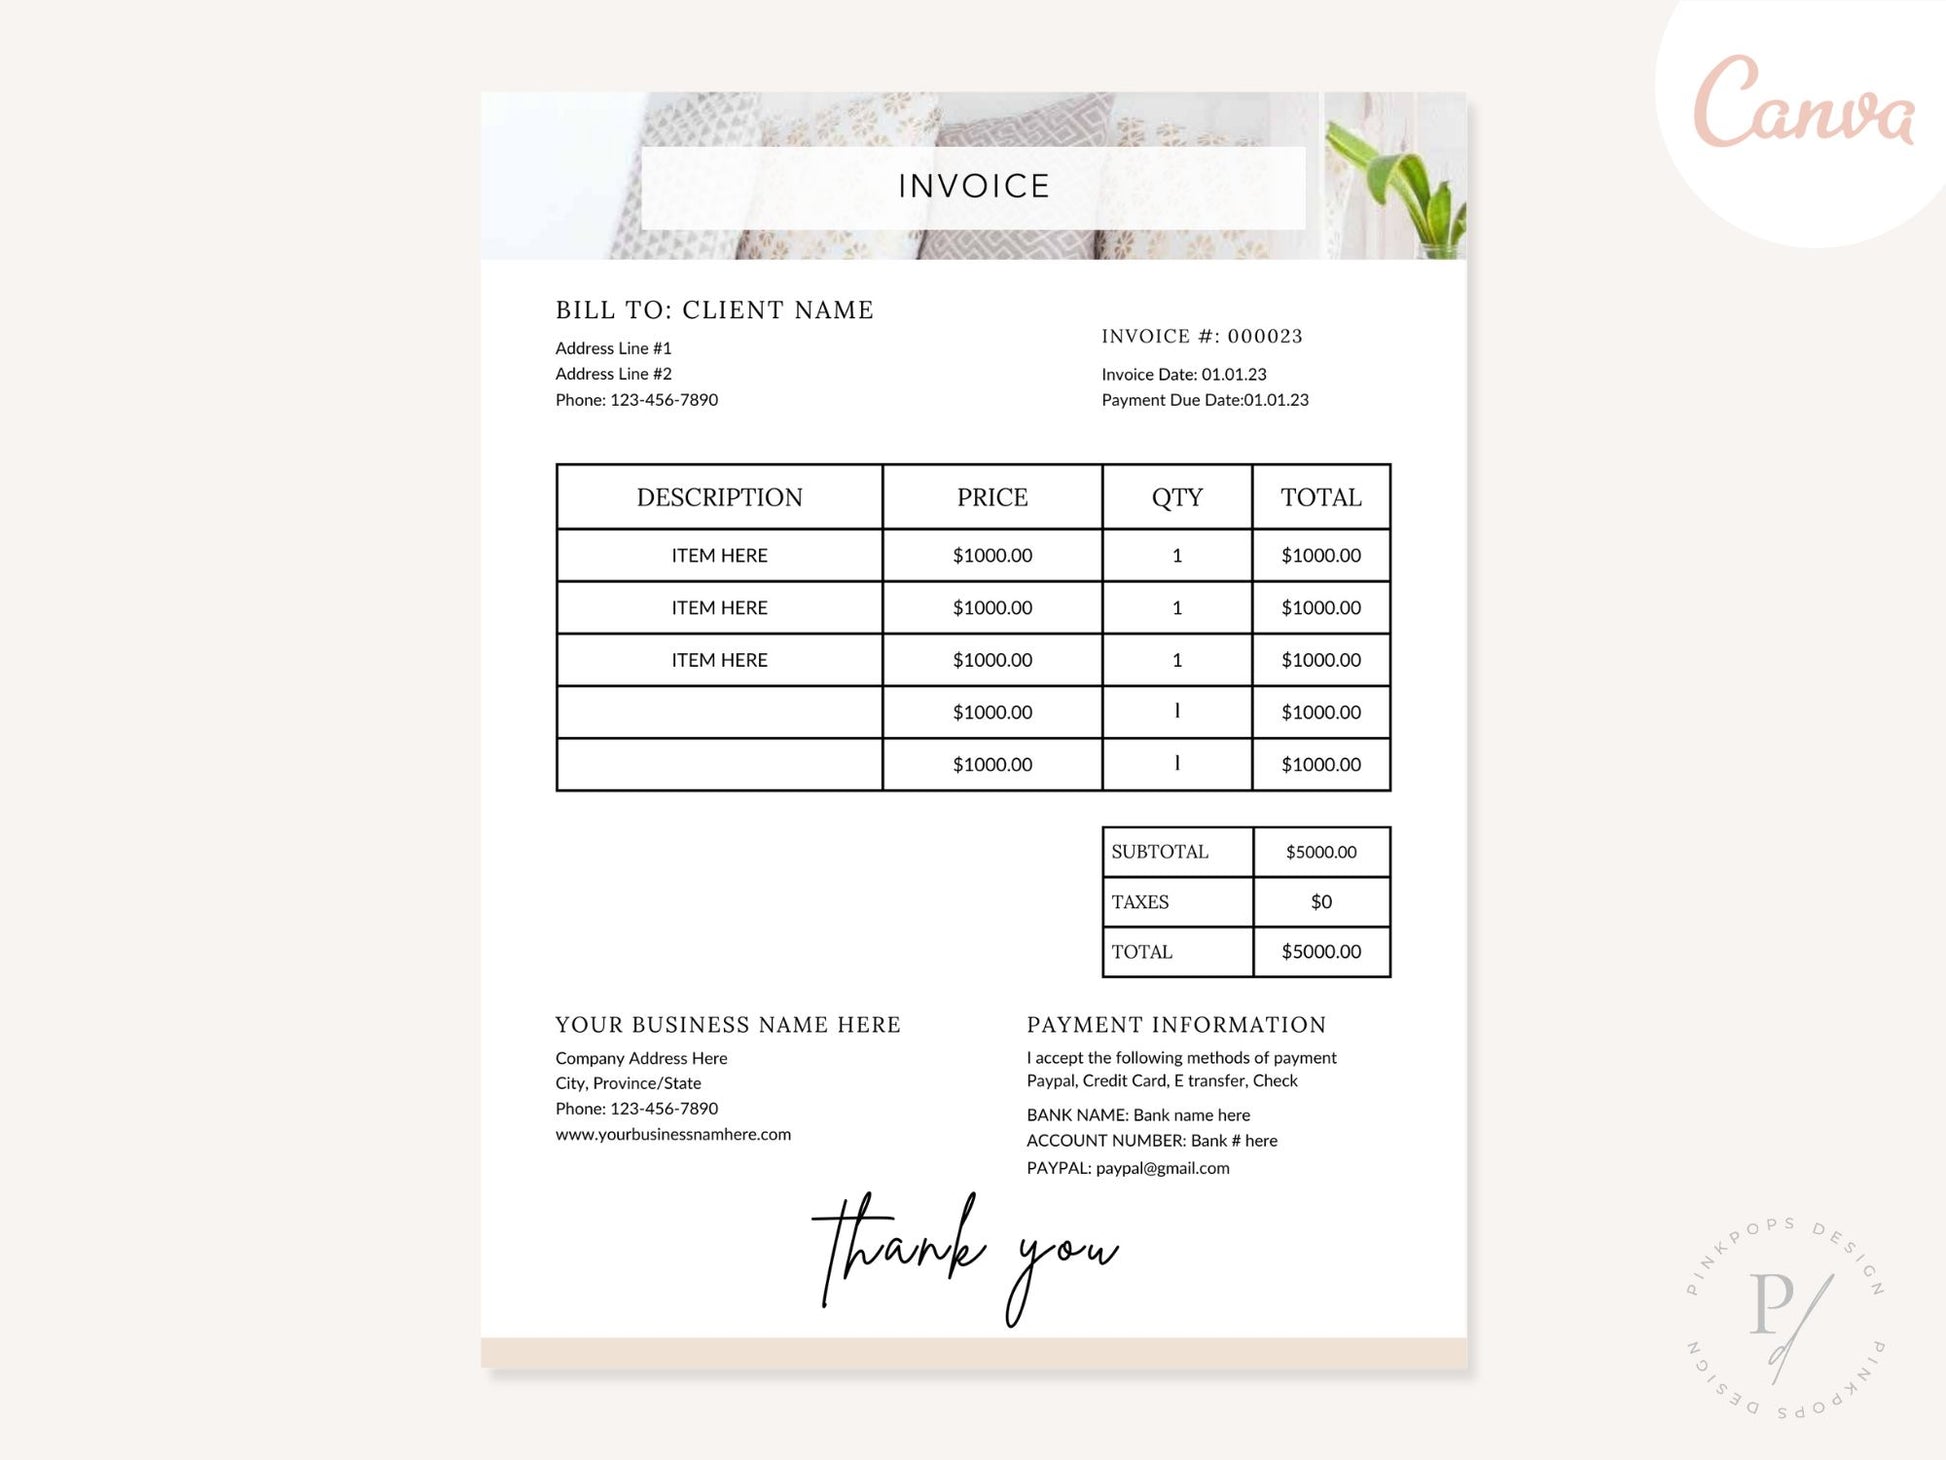 Cleaning Services Invoice - Editable template for streamlining the billing process, ensuring accuracy and professionalism in invoicing clients for cleaning services in the cleaning business.